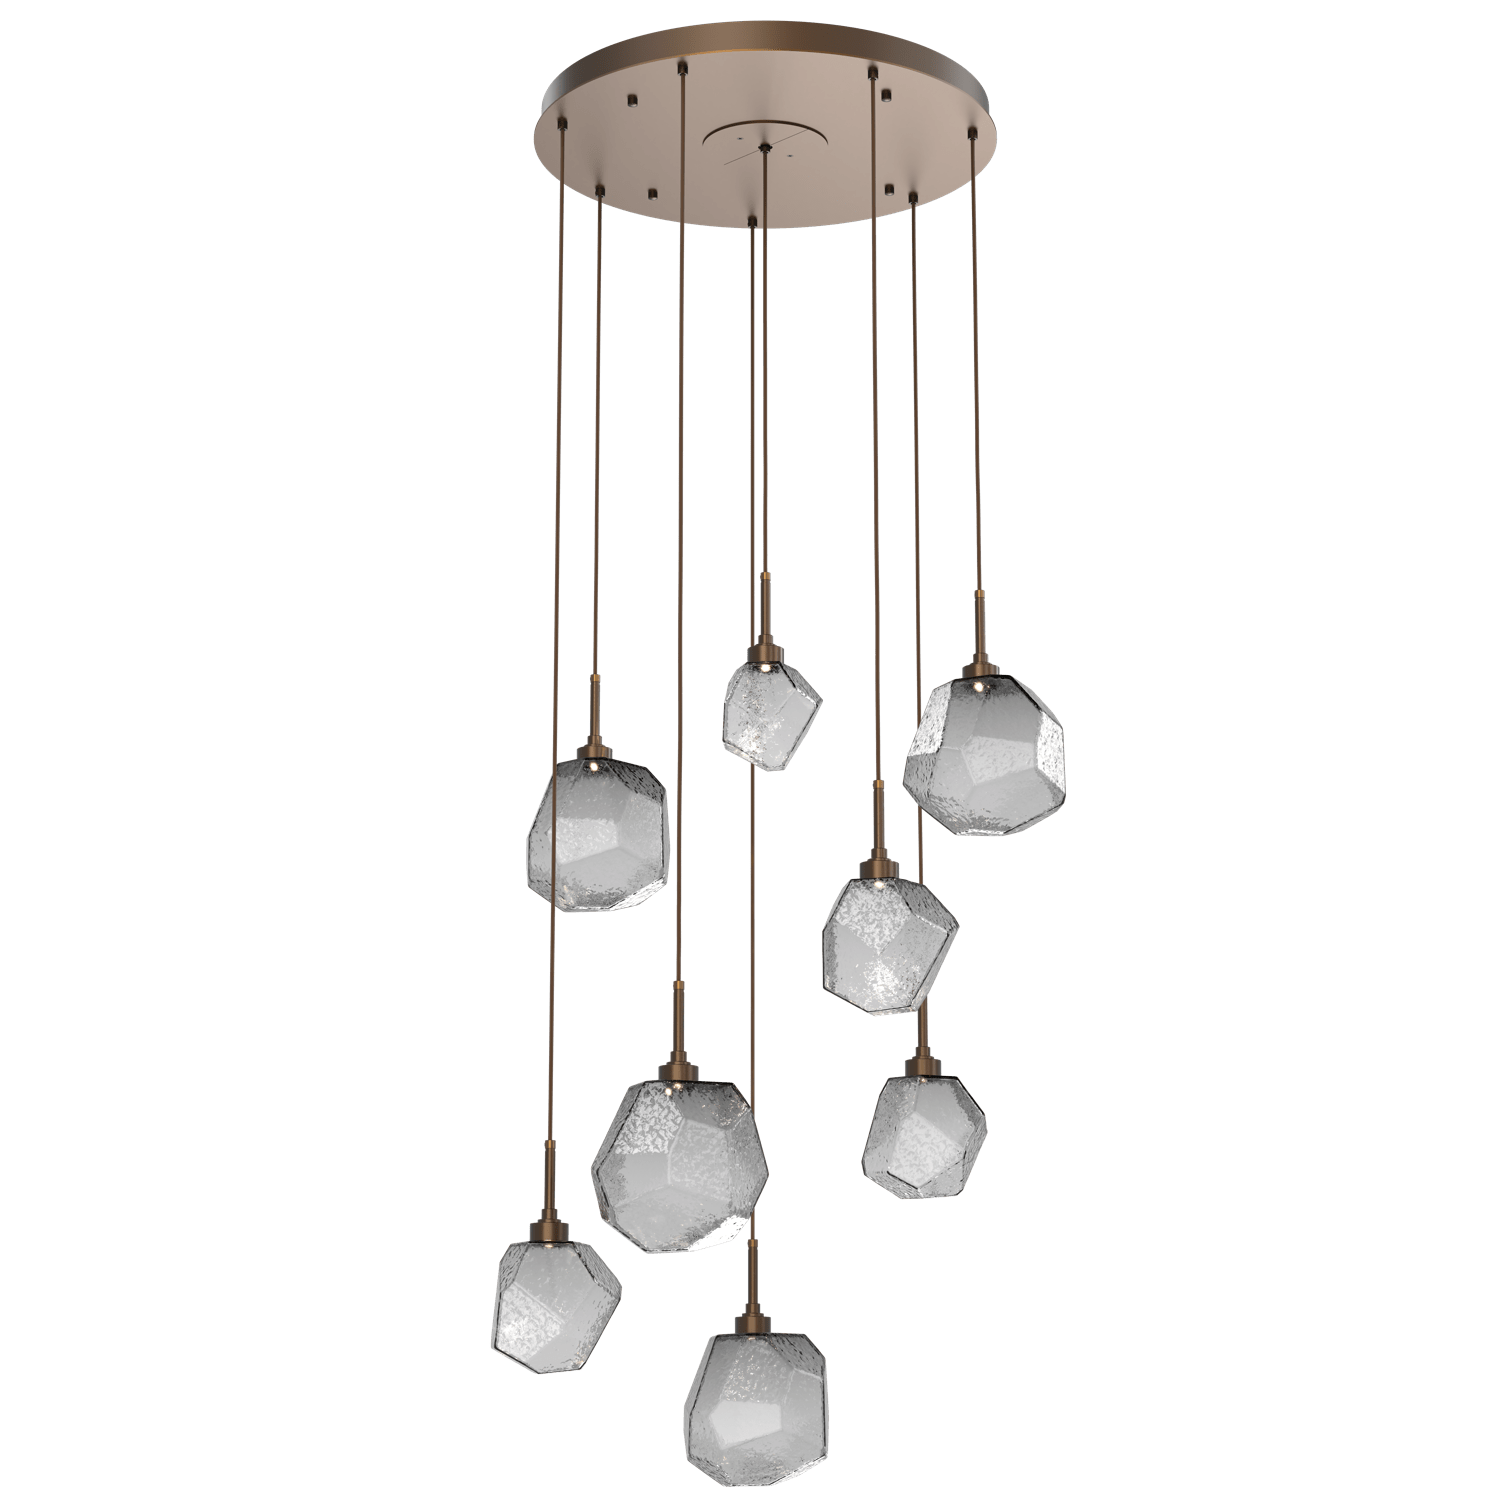 CHB0039-08-FB-S-Hammerton-Studio-Gem-8-light-round-pendant-chandelier-with-flat-bronze-finish-and-smoke-blown-glass-shades-and-LED-lamping